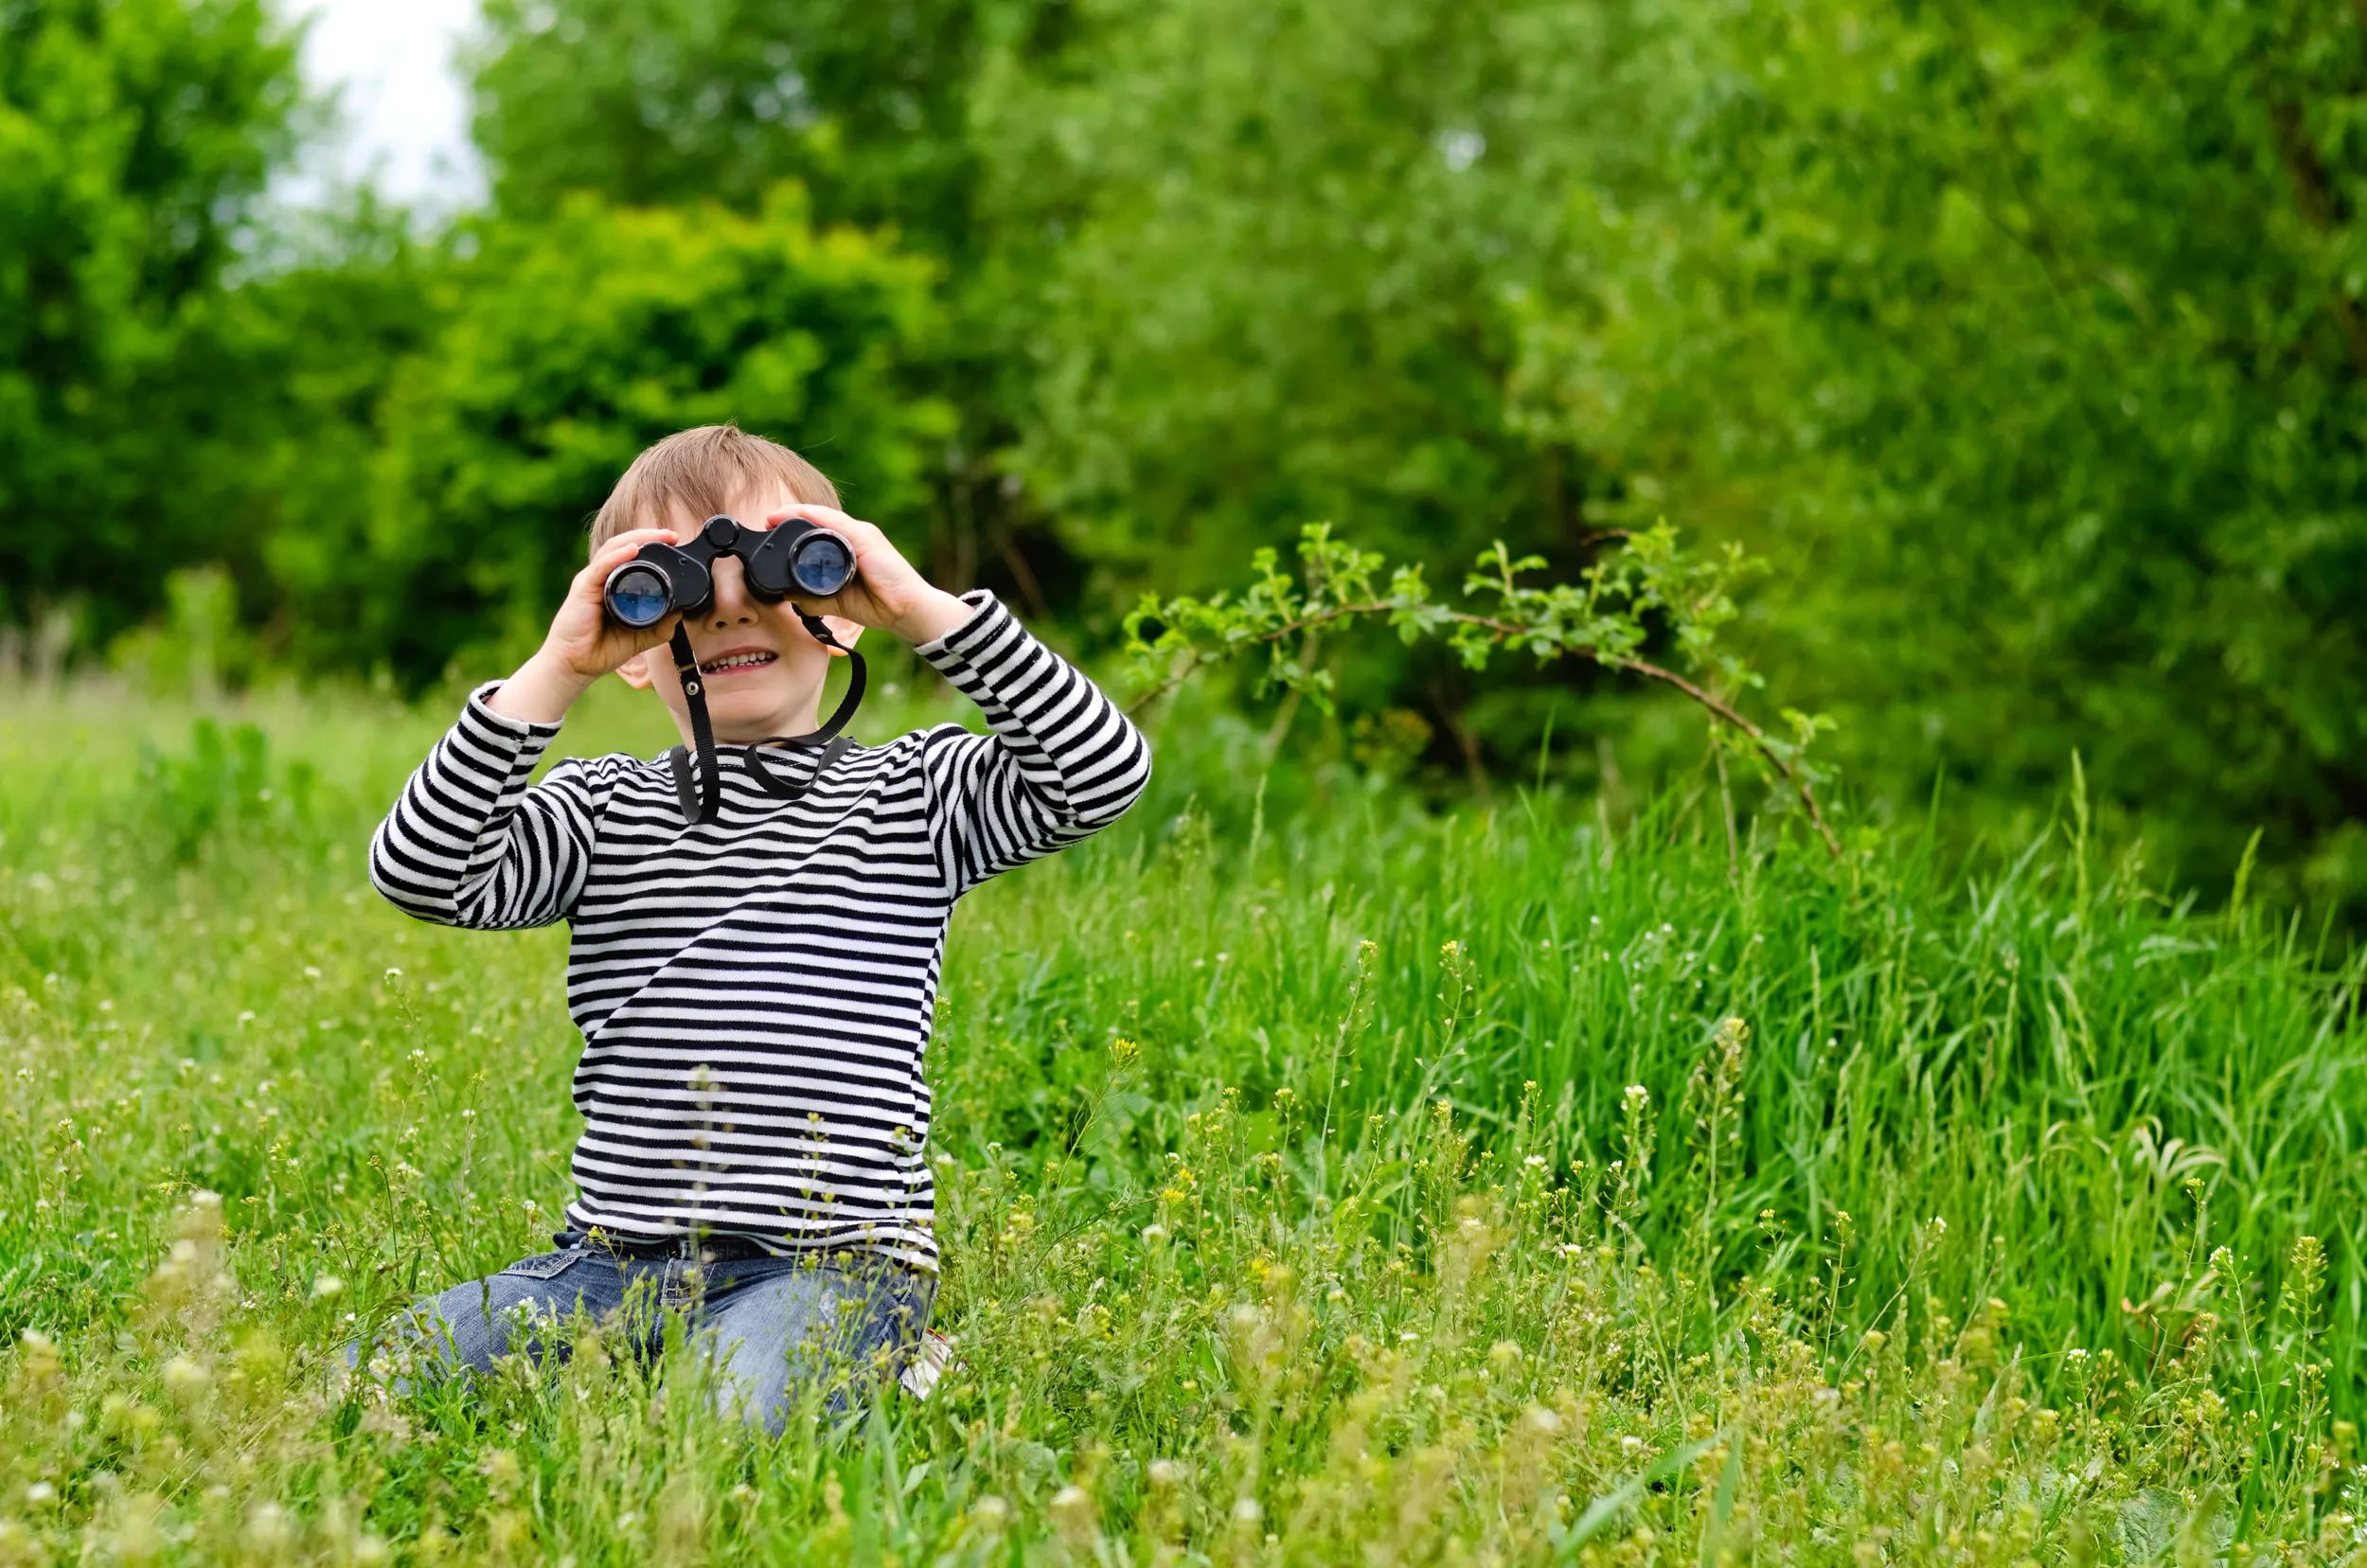 A child kneeling in a meadow, looking through binoculars towards the camera.